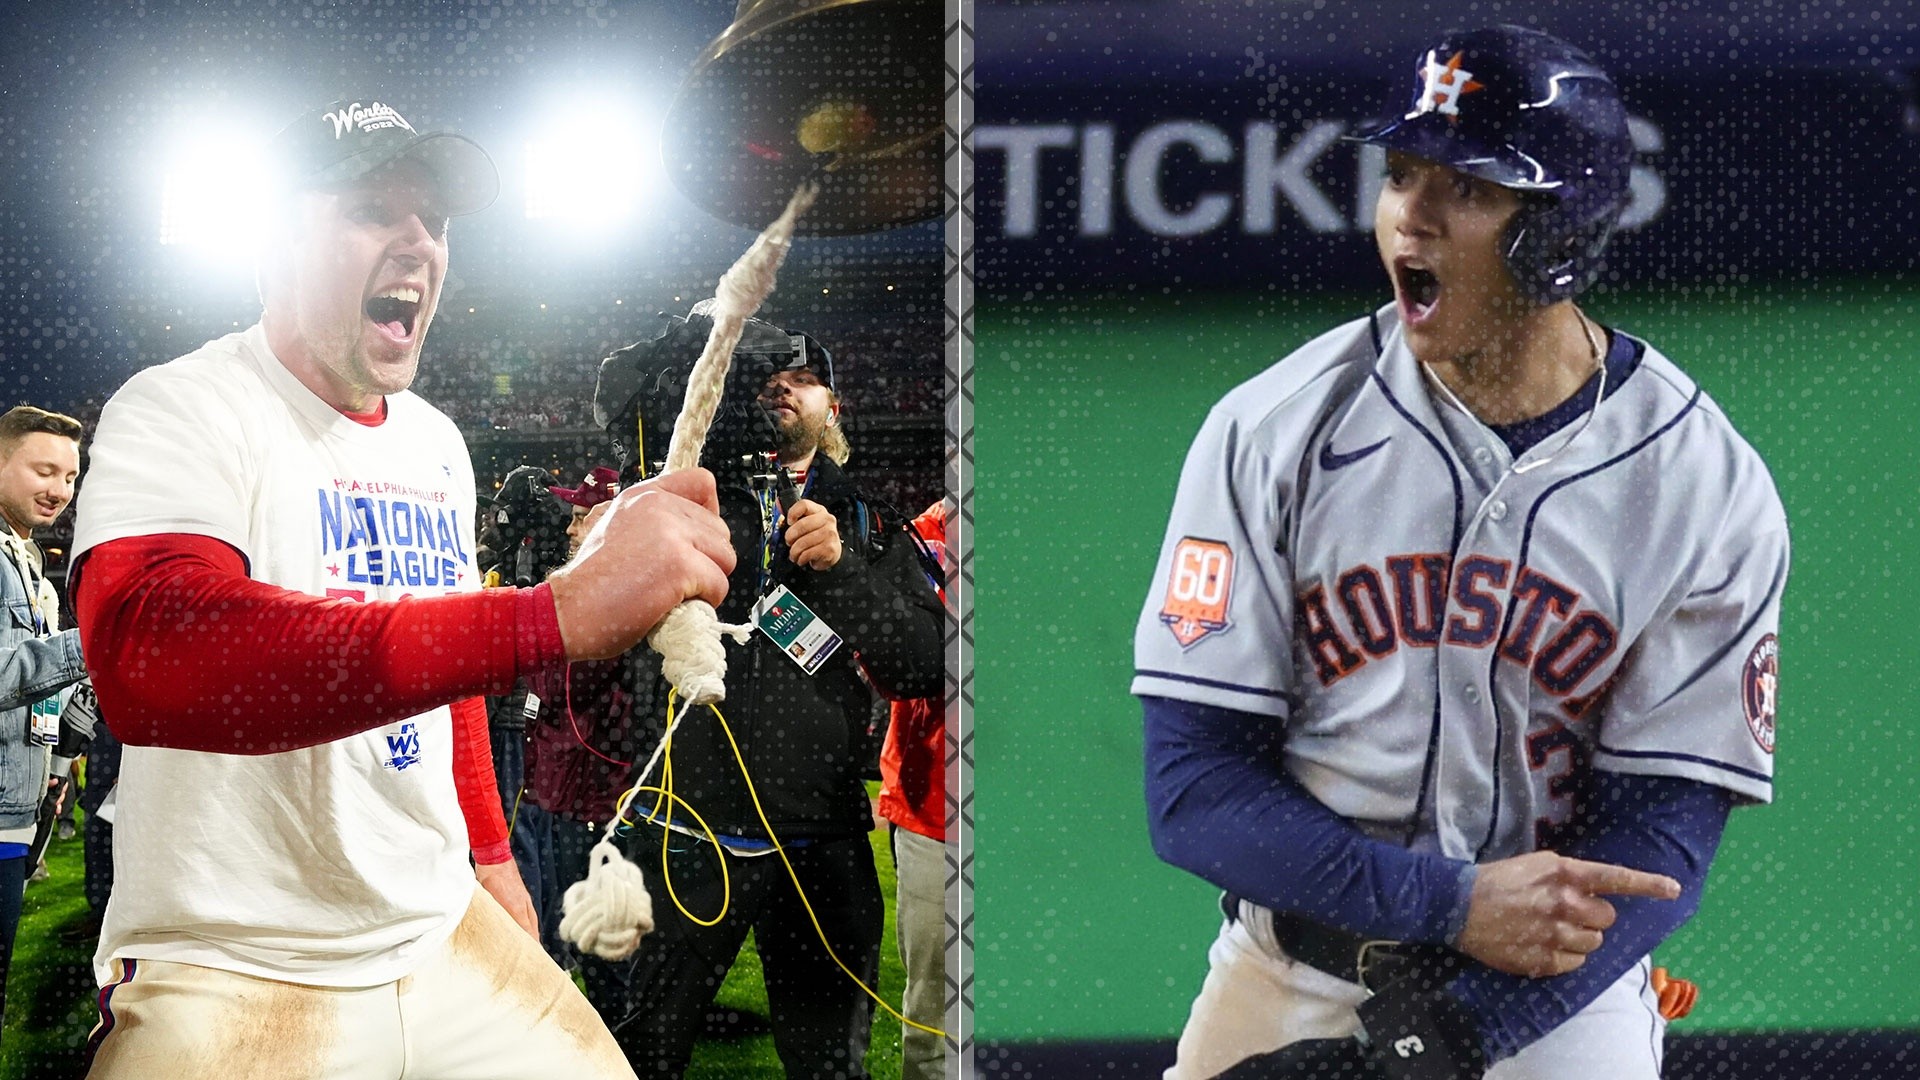 Phillies and Astros square off in one of baseball's biggest World